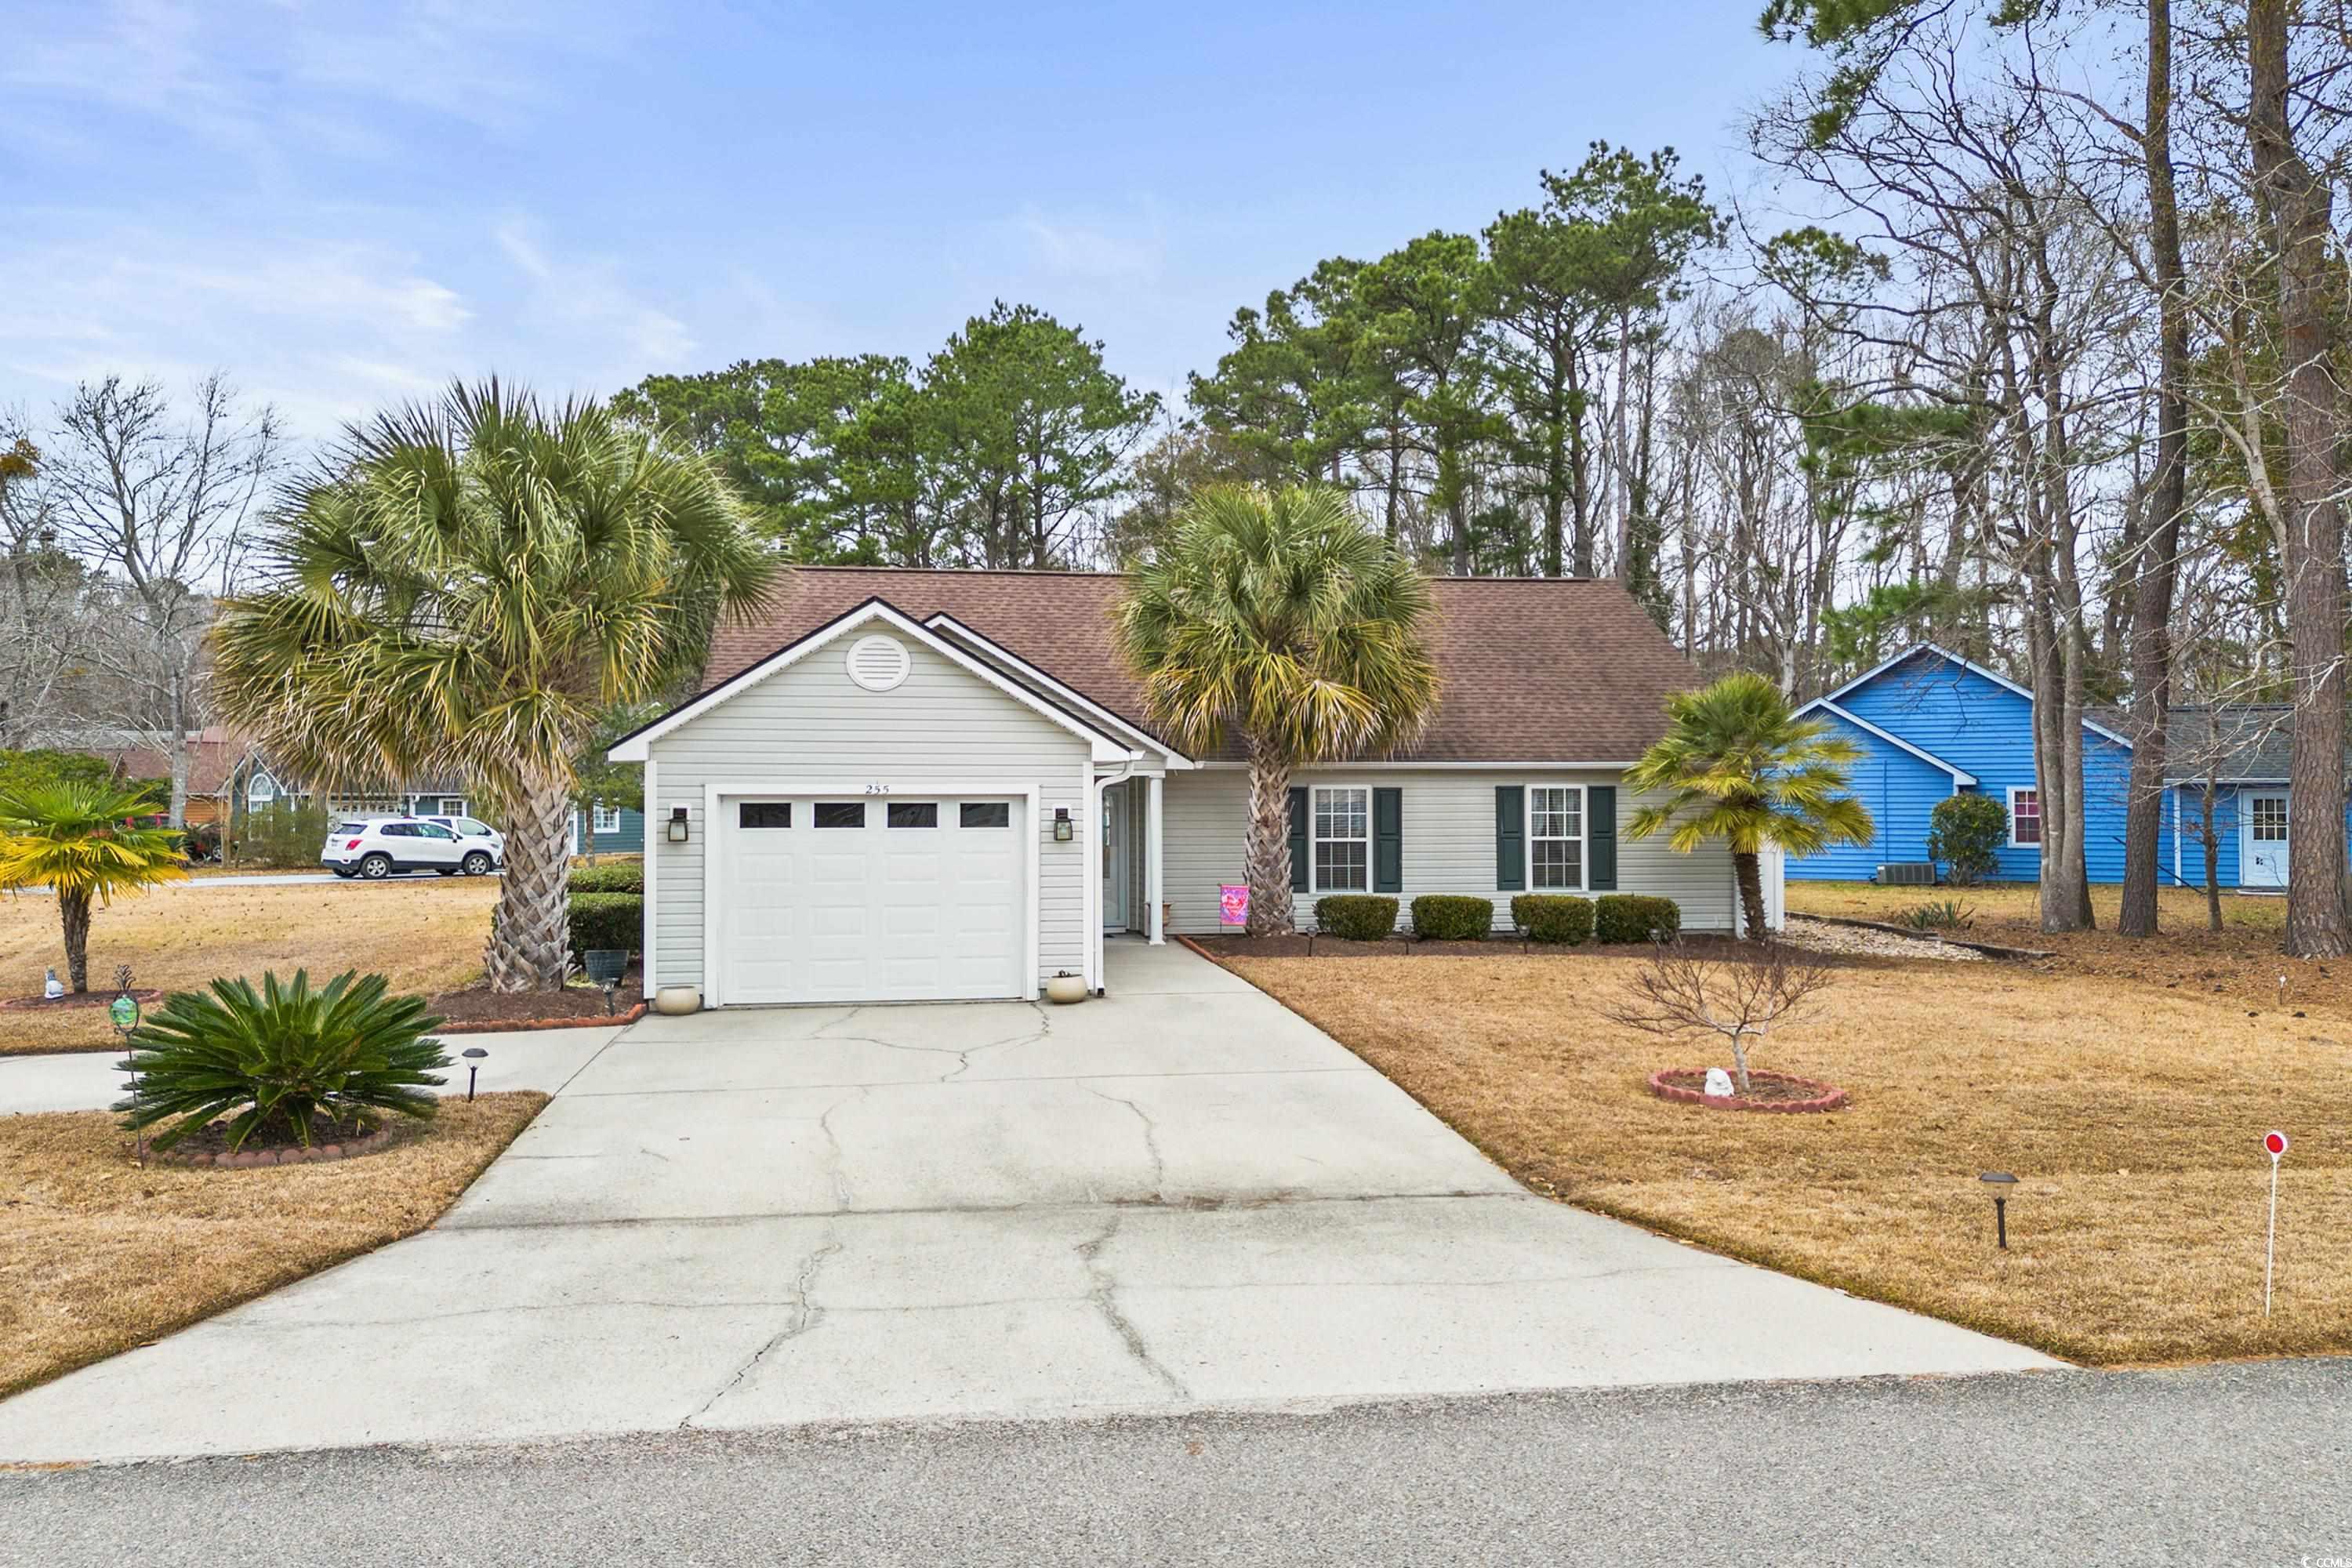 rare find!  don't miss this great location less then about 10 mins to the sought out cherry grove beach. cozy 3 bedroom, 2 bath with a carolina room on an large corner lot with a circular driveway. living room and dining room have cathedral ceilings with built ins. roof and hvac replaced about 6 years ago.  this house has been freshly painted, updated oven, light fixtures/fans, new hot water heater, front and back door. carolina room and patio overlook large partially fenced yard.  on a hot summer day just walk right across the street to the community pool.  this community is conveniently located to route 31, shopping, restaurants, beach, golf and so much more but you are just outside the hustle and bustle for a quiet setting.